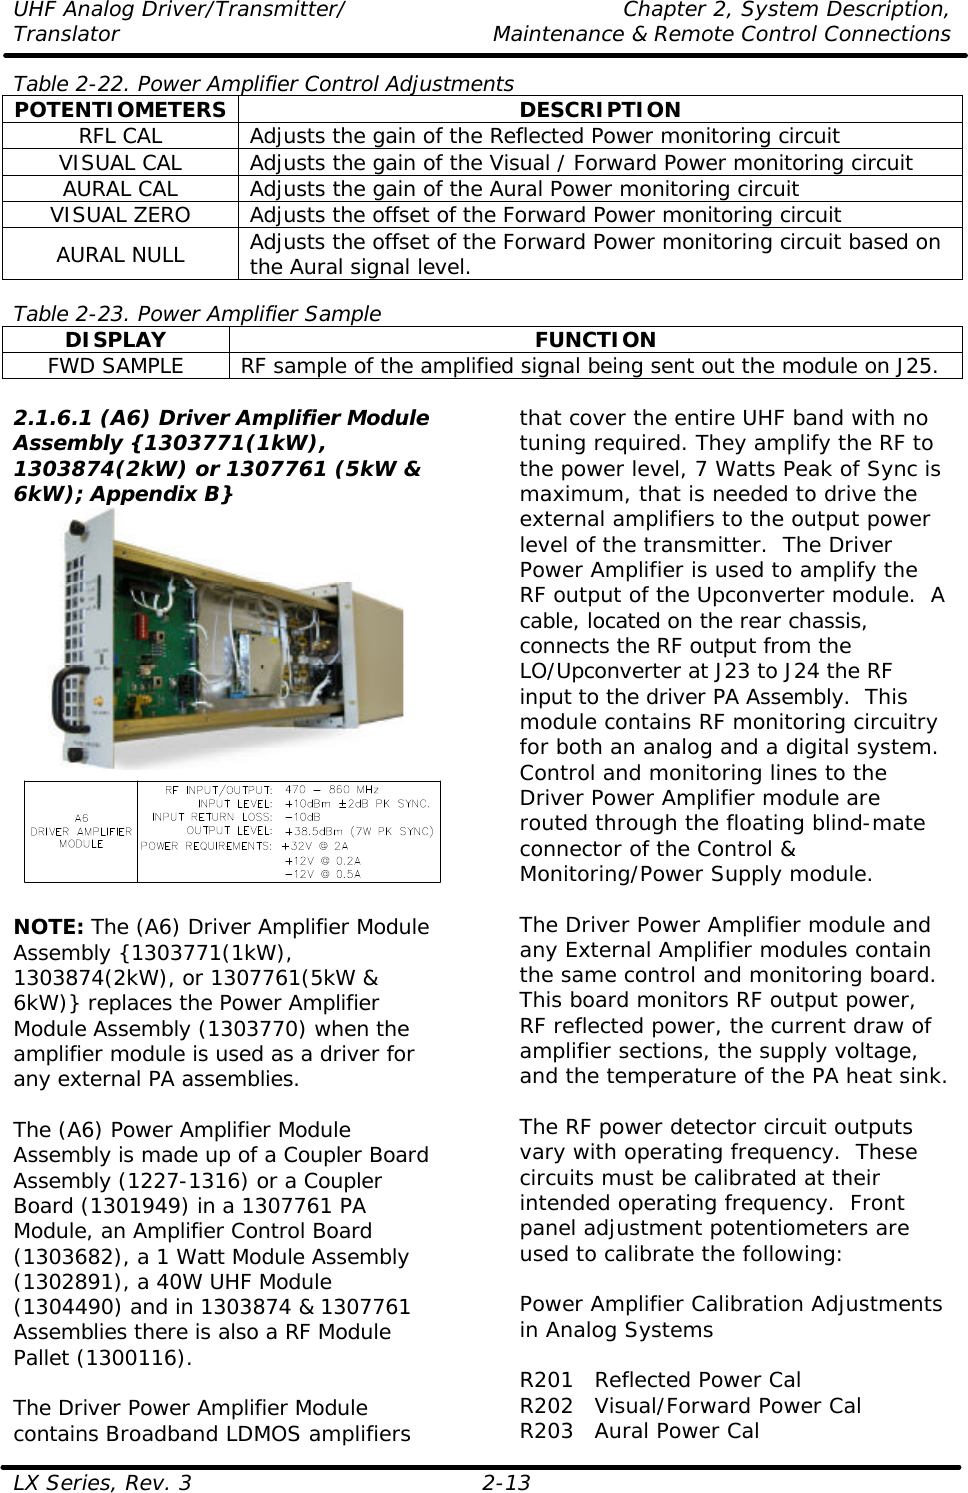 UHF Analog Driver/Transmitter/ Chapter 2, System Description, Translator Maintenance &amp; Remote Control Connections LX Series, Rev. 3 2-13 Table 2-22. Power Amplifier Control Adjustments POTENTIOMETERS DESCRIPTION RFL CAL Adjusts the gain of the Reflected Power monitoring circuit VISUAL CAL Adjusts the gain of the Visual / Forward Power monitoring circuit AURAL CAL Adjusts the gain of the Aural Power monitoring circuit VISUAL ZERO Adjusts the offset of the Forward Power monitoring circuit AURAL NULL Adjusts the offset of the Forward Power monitoring circuit based on the Aural signal level.  Table 2-23. Power Amplifier Sample DISPLAY FUNCTION FWD SAMPLE RF sample of the amplified signal being sent out the module on J25.  2.1.6.1 (A6) Driver Amplifier Module Assembly {1303771(1kW), 1303874(2kW) or 1307761 (5kW &amp; 6kW); Appendix B}    NOTE: The (A6) Driver Amplifier Module Assembly {1303771(1kW), 1303874(2kW), or 1307761(5kW &amp; 6kW)} replaces the Power Amplifier Module Assembly (1303770) when the amplifier module is used as a driver for any external PA assemblies.  The (A6) Power Amplifier Module Assembly is made up of a Coupler Board Assembly (1227-1316) or a Coupler Board (1301949) in a 1307761 PA Module, an Amplifier Control Board (1303682), a 1 Watt Module Assembly (1302891), a 40W UHF Module (1304490) and in 1303874 &amp; 1307761 Assemblies there is also a RF Module Pallet (1300116).  The Driver Power Amplifier Module contains Broadband LDMOS amplifiers that cover the entire UHF band with no tuning required. They amplify the RF to the power level, 7 Watts Peak of Sync is maximum, that is needed to drive the external amplifiers to the output power level of the transmitter.  The Driver Power Amplifier is used to amplify the RF output of the Upconverter module.  A cable, located on the rear chassis, connects the RF output from the LO/Upconverter at J23 to J24 the RF input to the driver PA Assembly.  This module contains RF monitoring circuitry for both an analog and a digital system.  Control and monitoring lines to the Driver Power Amplifier module are routed through the floating blind-mate connector of the Control &amp; Monitoring/Power Supply module.  The Driver Power Amplifier module and any External Amplifier modules contain the same control and monitoring board.  This board monitors RF output power, RF reflected power, the current draw of amplifier sections, the supply voltage, and the temperature of the PA heat sink.  The RF power detector circuit outputs vary with operating frequency.  These circuits must be calibrated at their intended operating frequency.  Front panel adjustment potentiometers are used to calibrate the following:  Power Amplifier Calibration Adjustments in Analog Systems  R201 Reflected Power Cal R202 Visual/Forward Power Cal R203 Aural Power Cal 